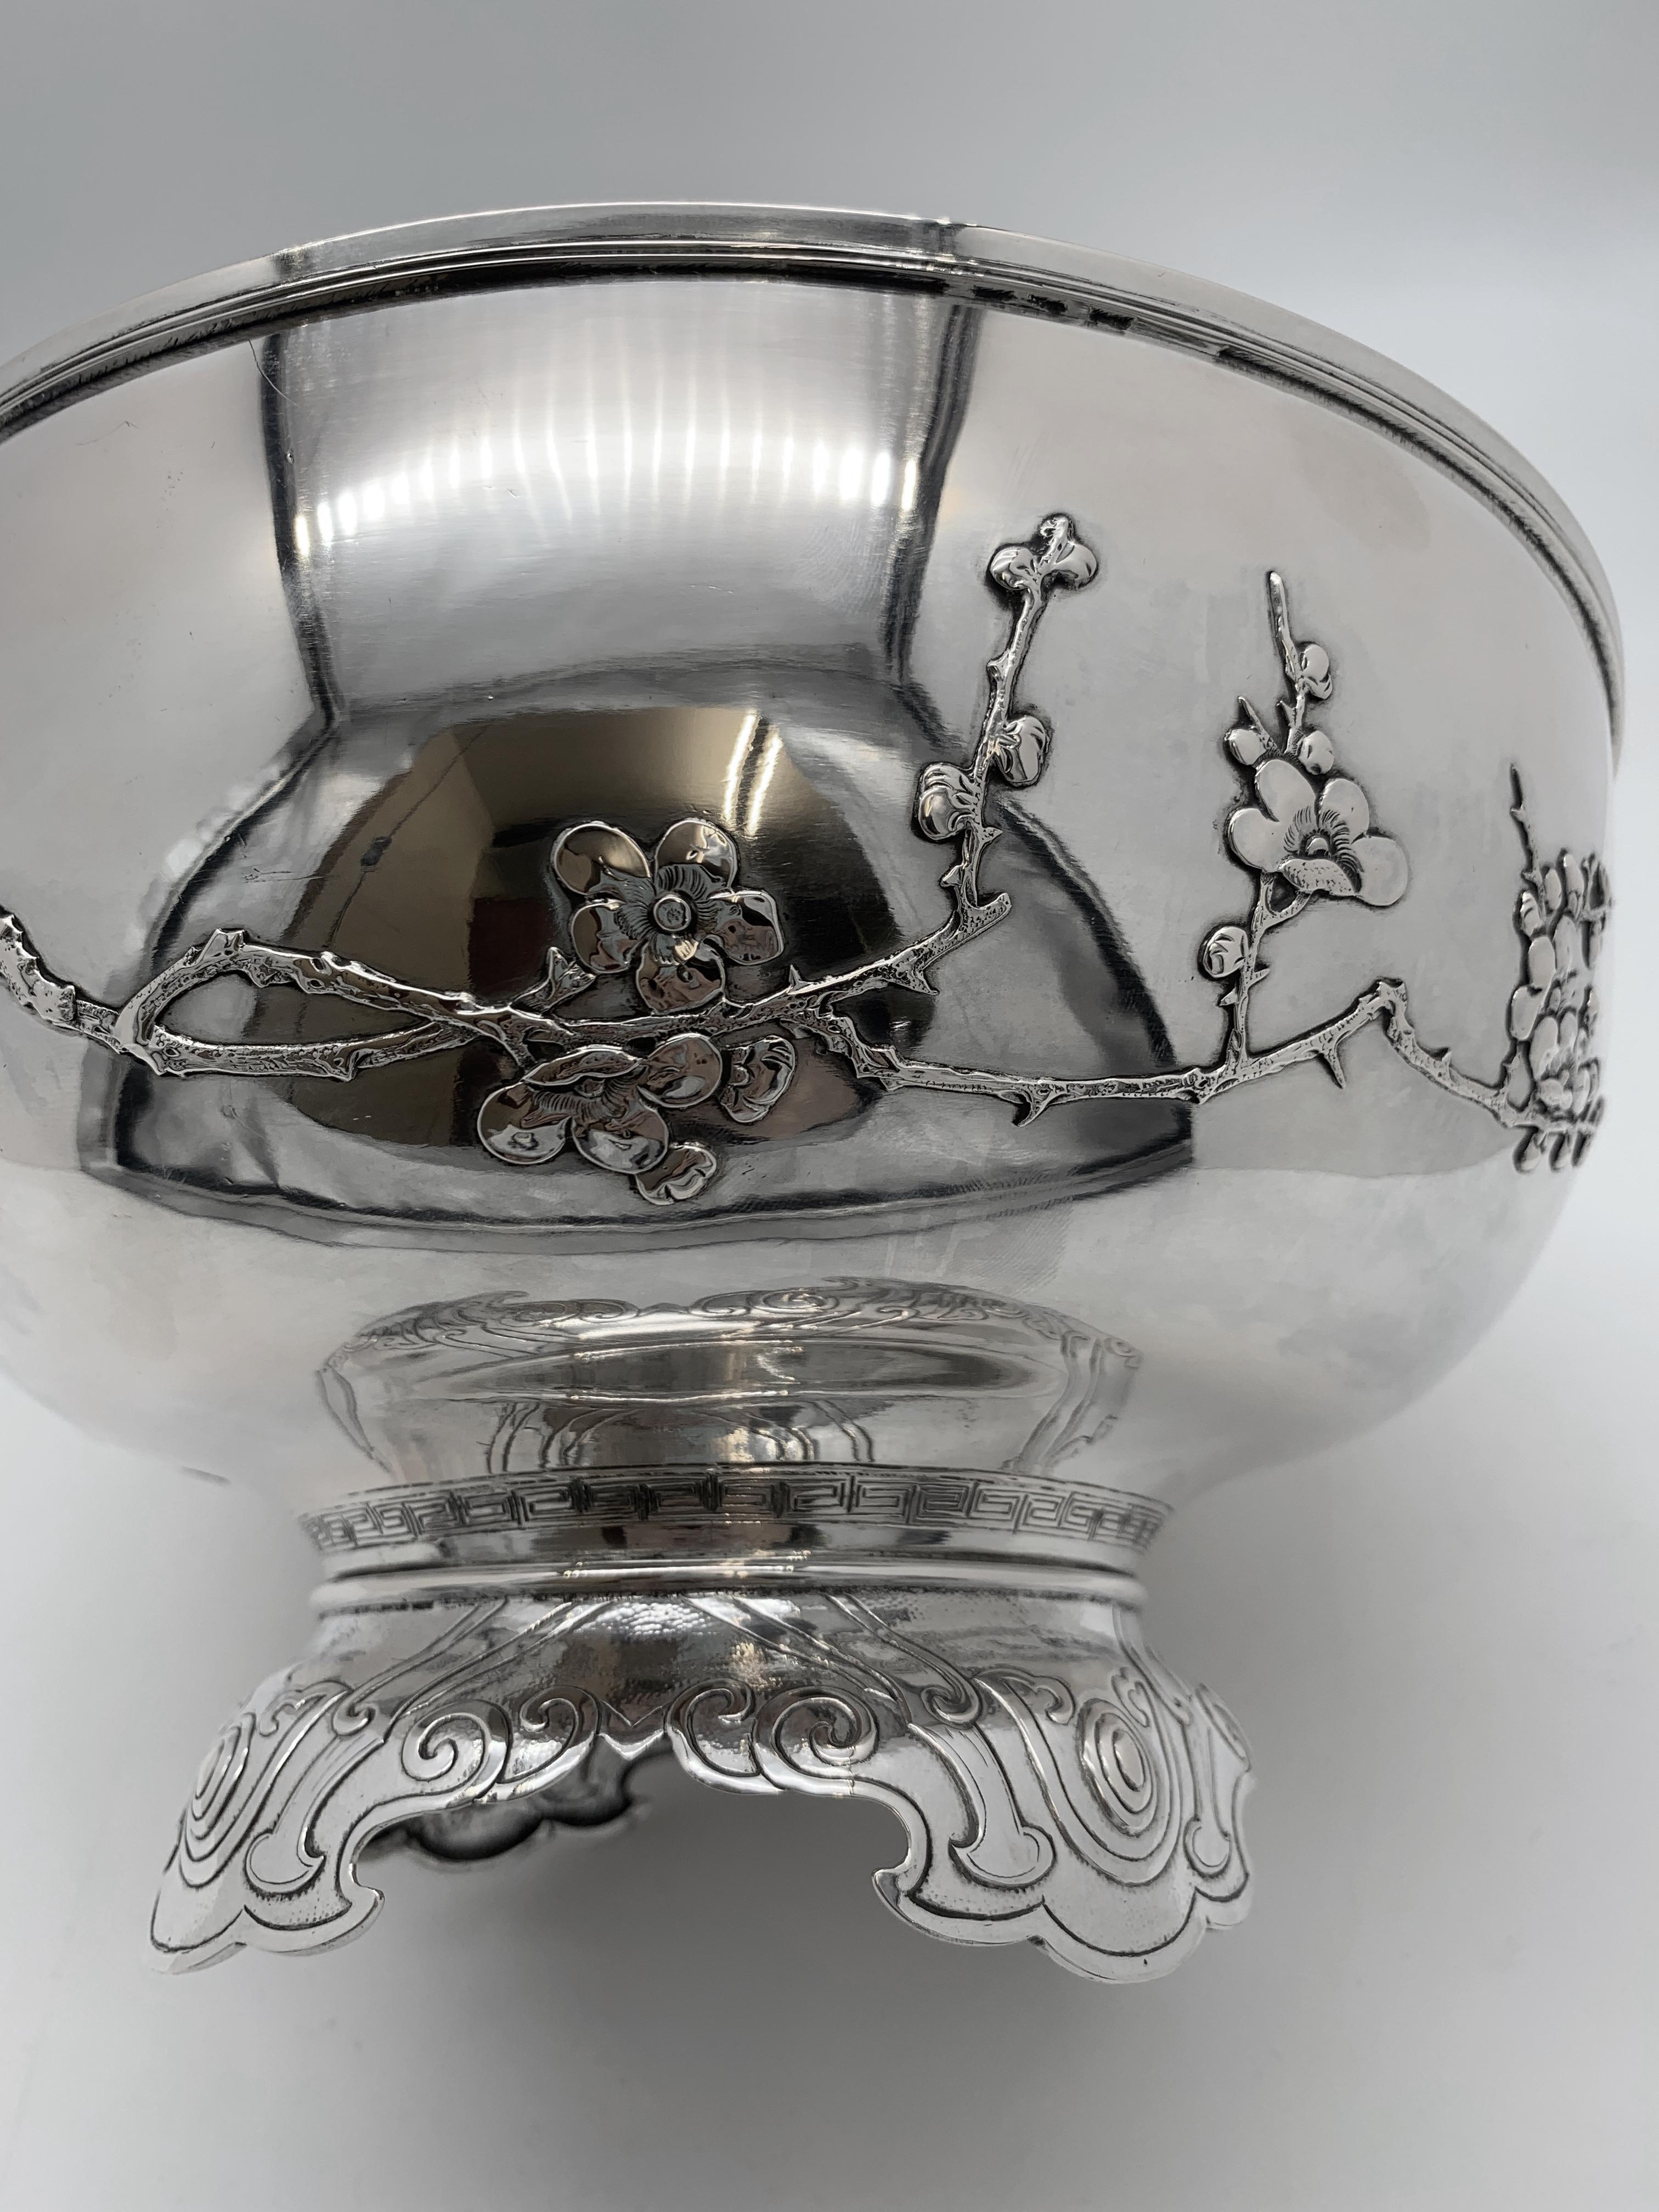 Chinese Export Silver Bowl, of round form with applied prunus around two-thirds of the bowl leaving the remainder plain, in keeping with Chinese tradition seen on paintings where blank space is left. The foot has a very unusual ruyi pattern embossed